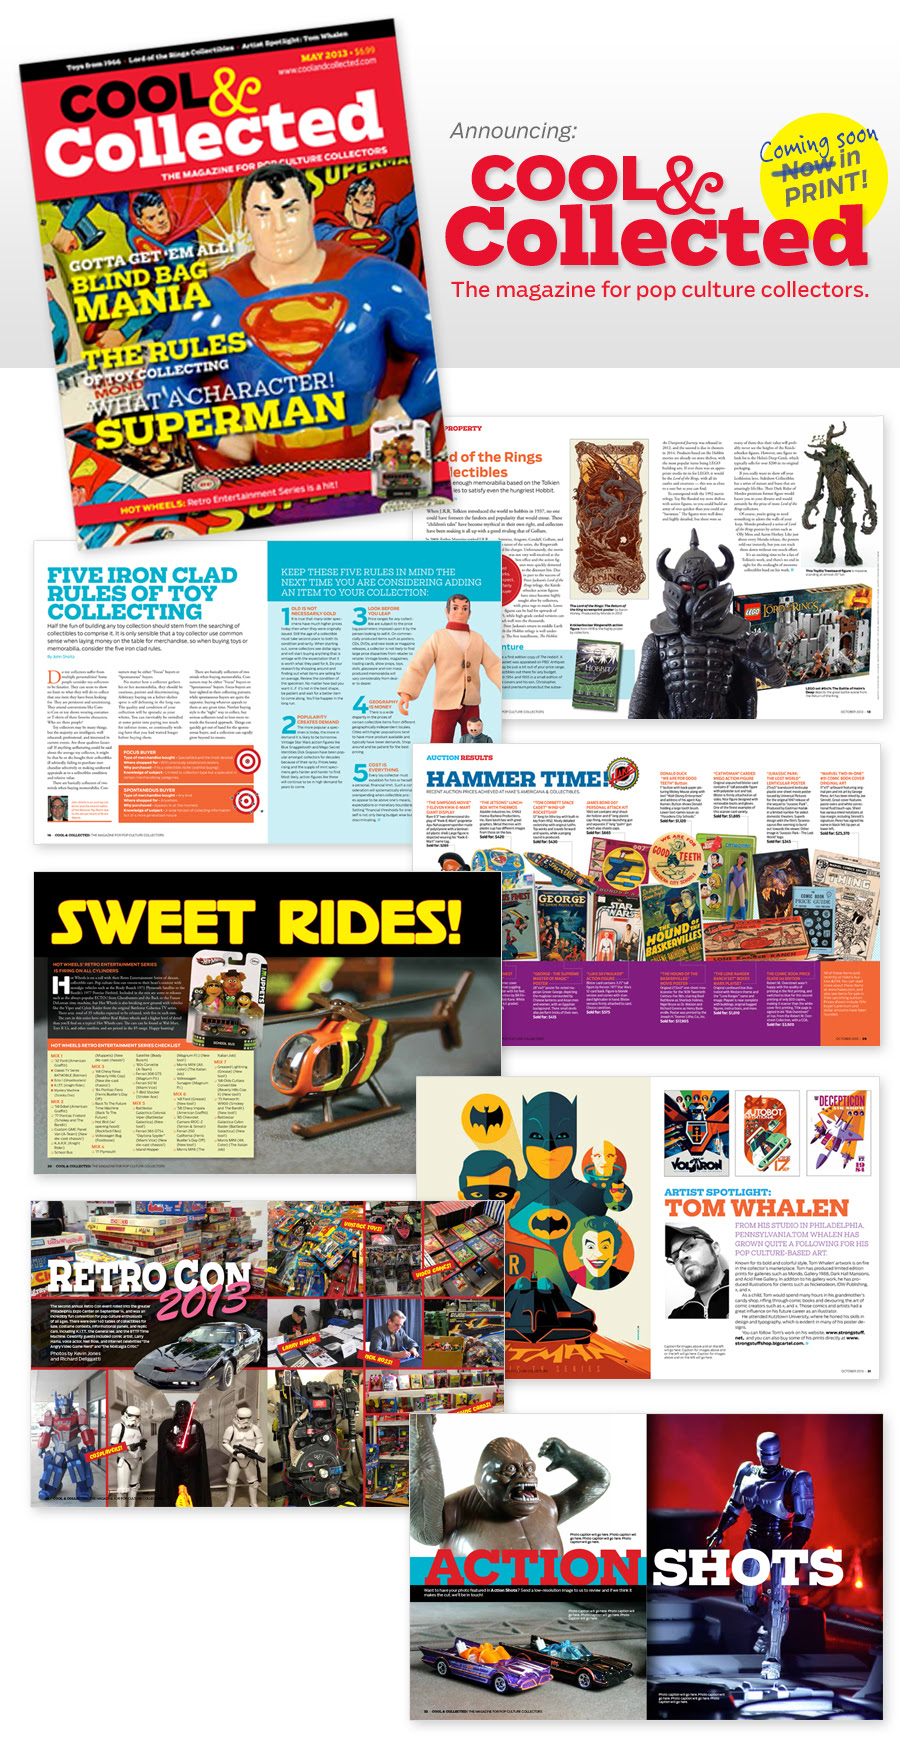 Cool & Collected Magazine for pop culture collectors